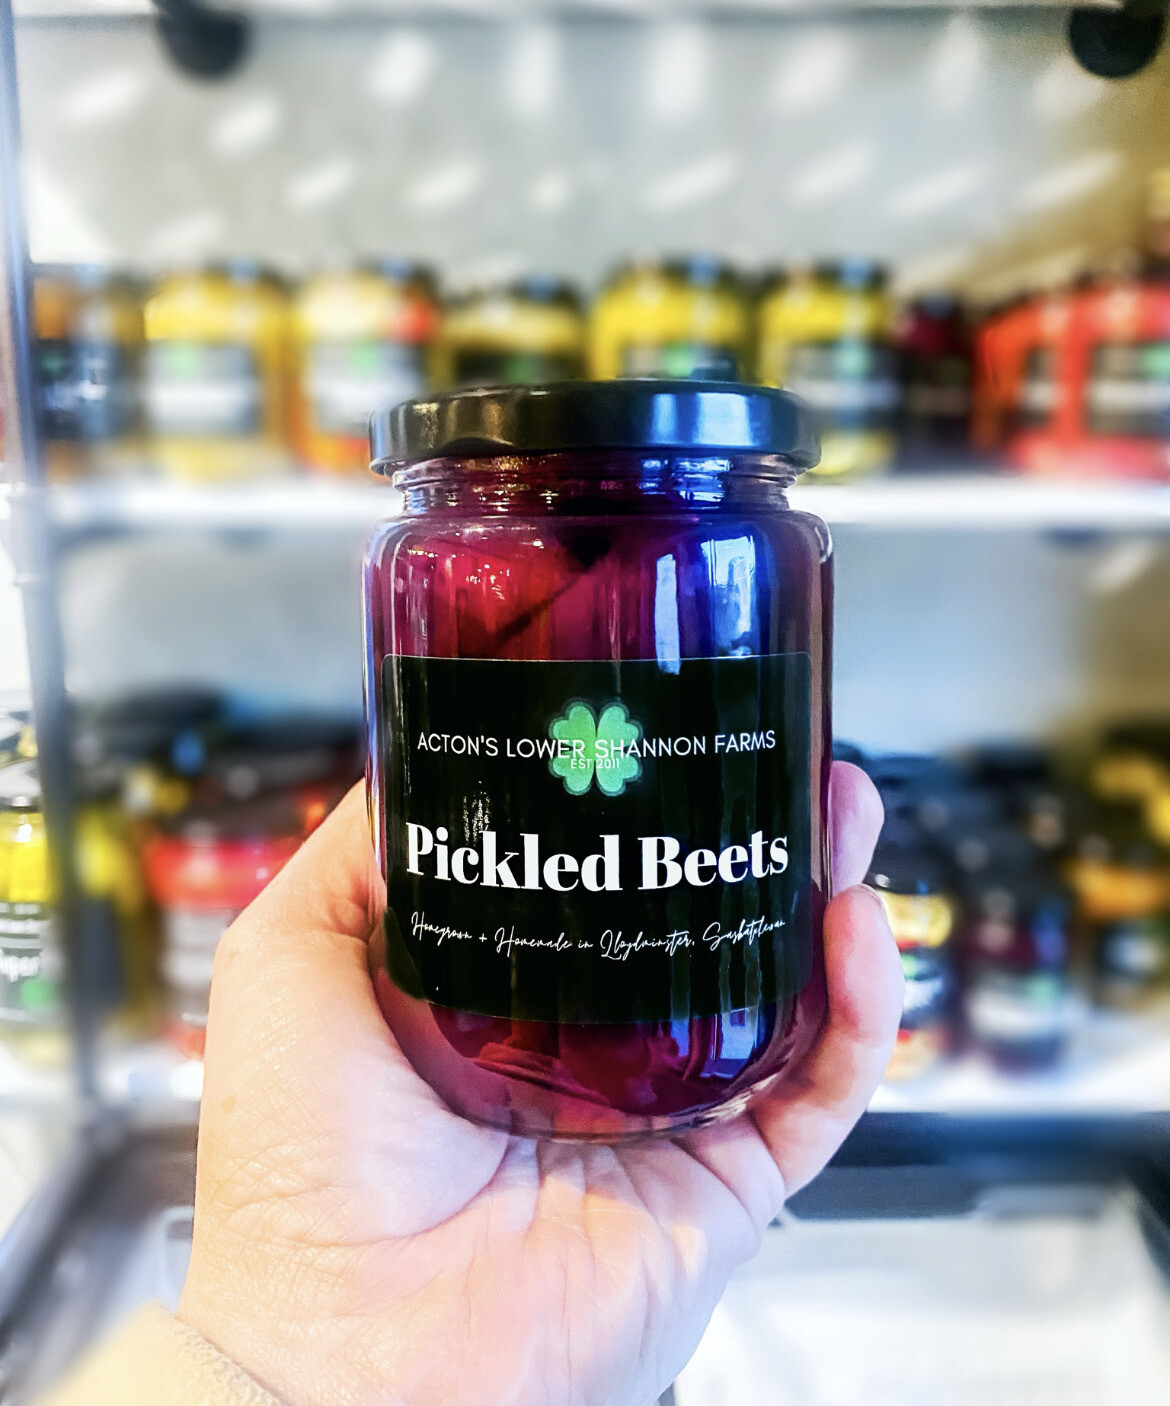 Pickled Beets (375ml)